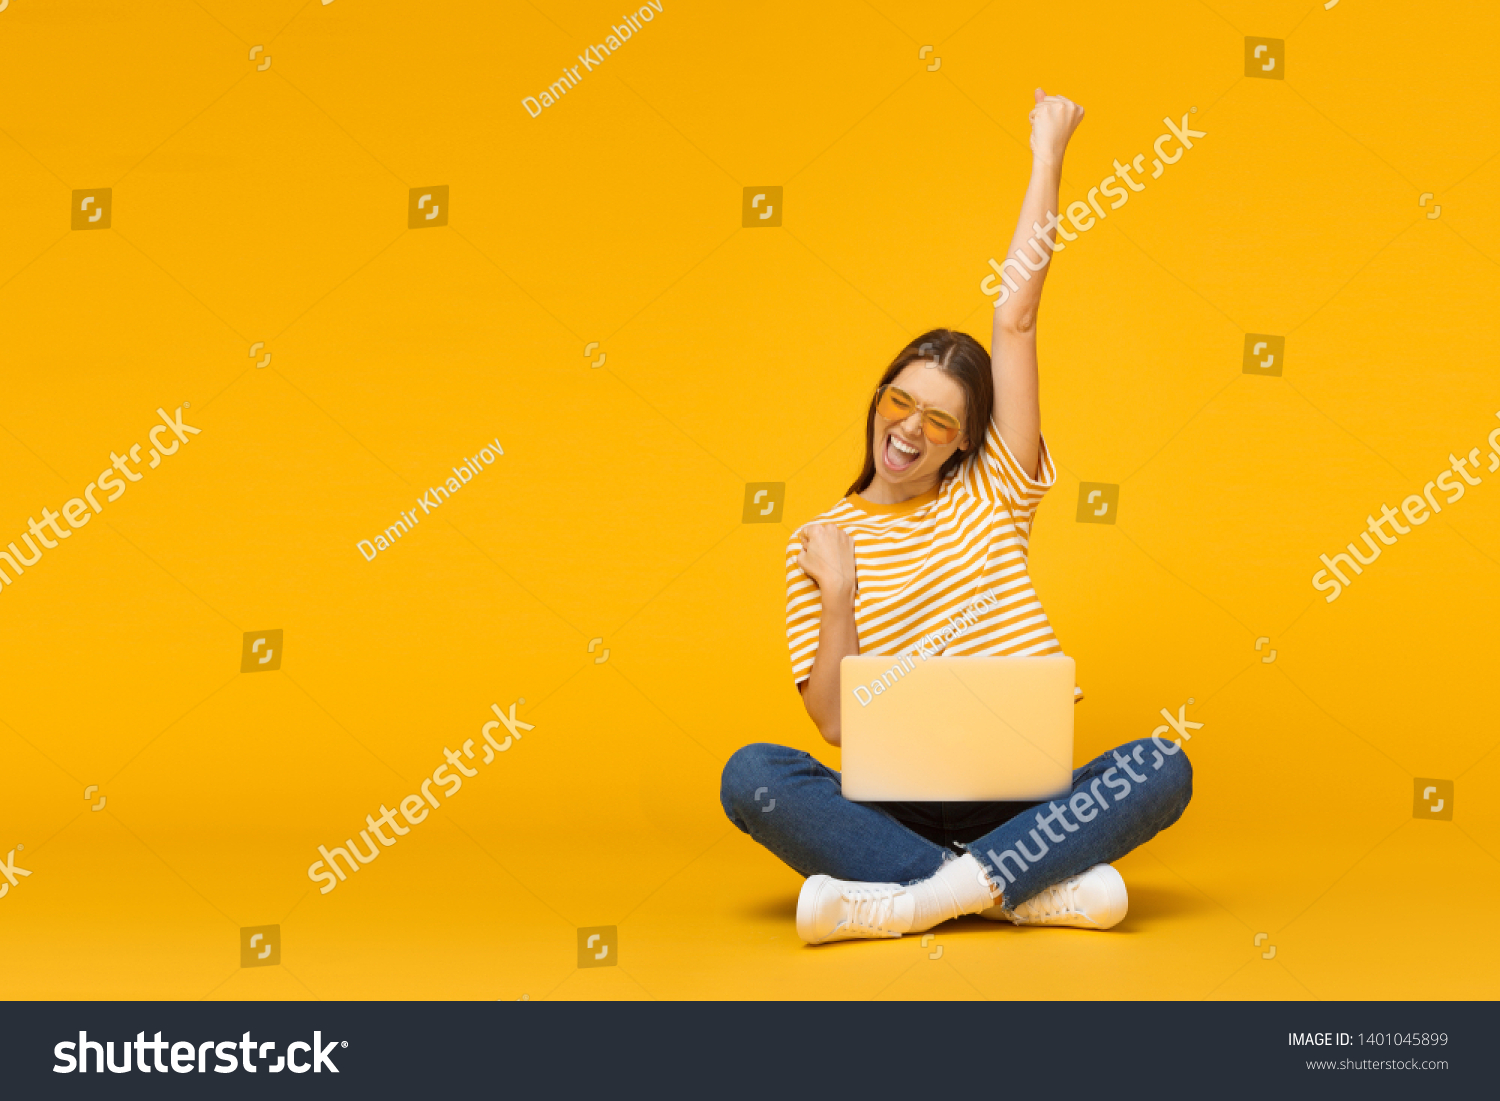 Winner! Excited smiling girl sitting on floor with laptop, raising one hand in the air is she wins, isolated on yellow background #1401045899